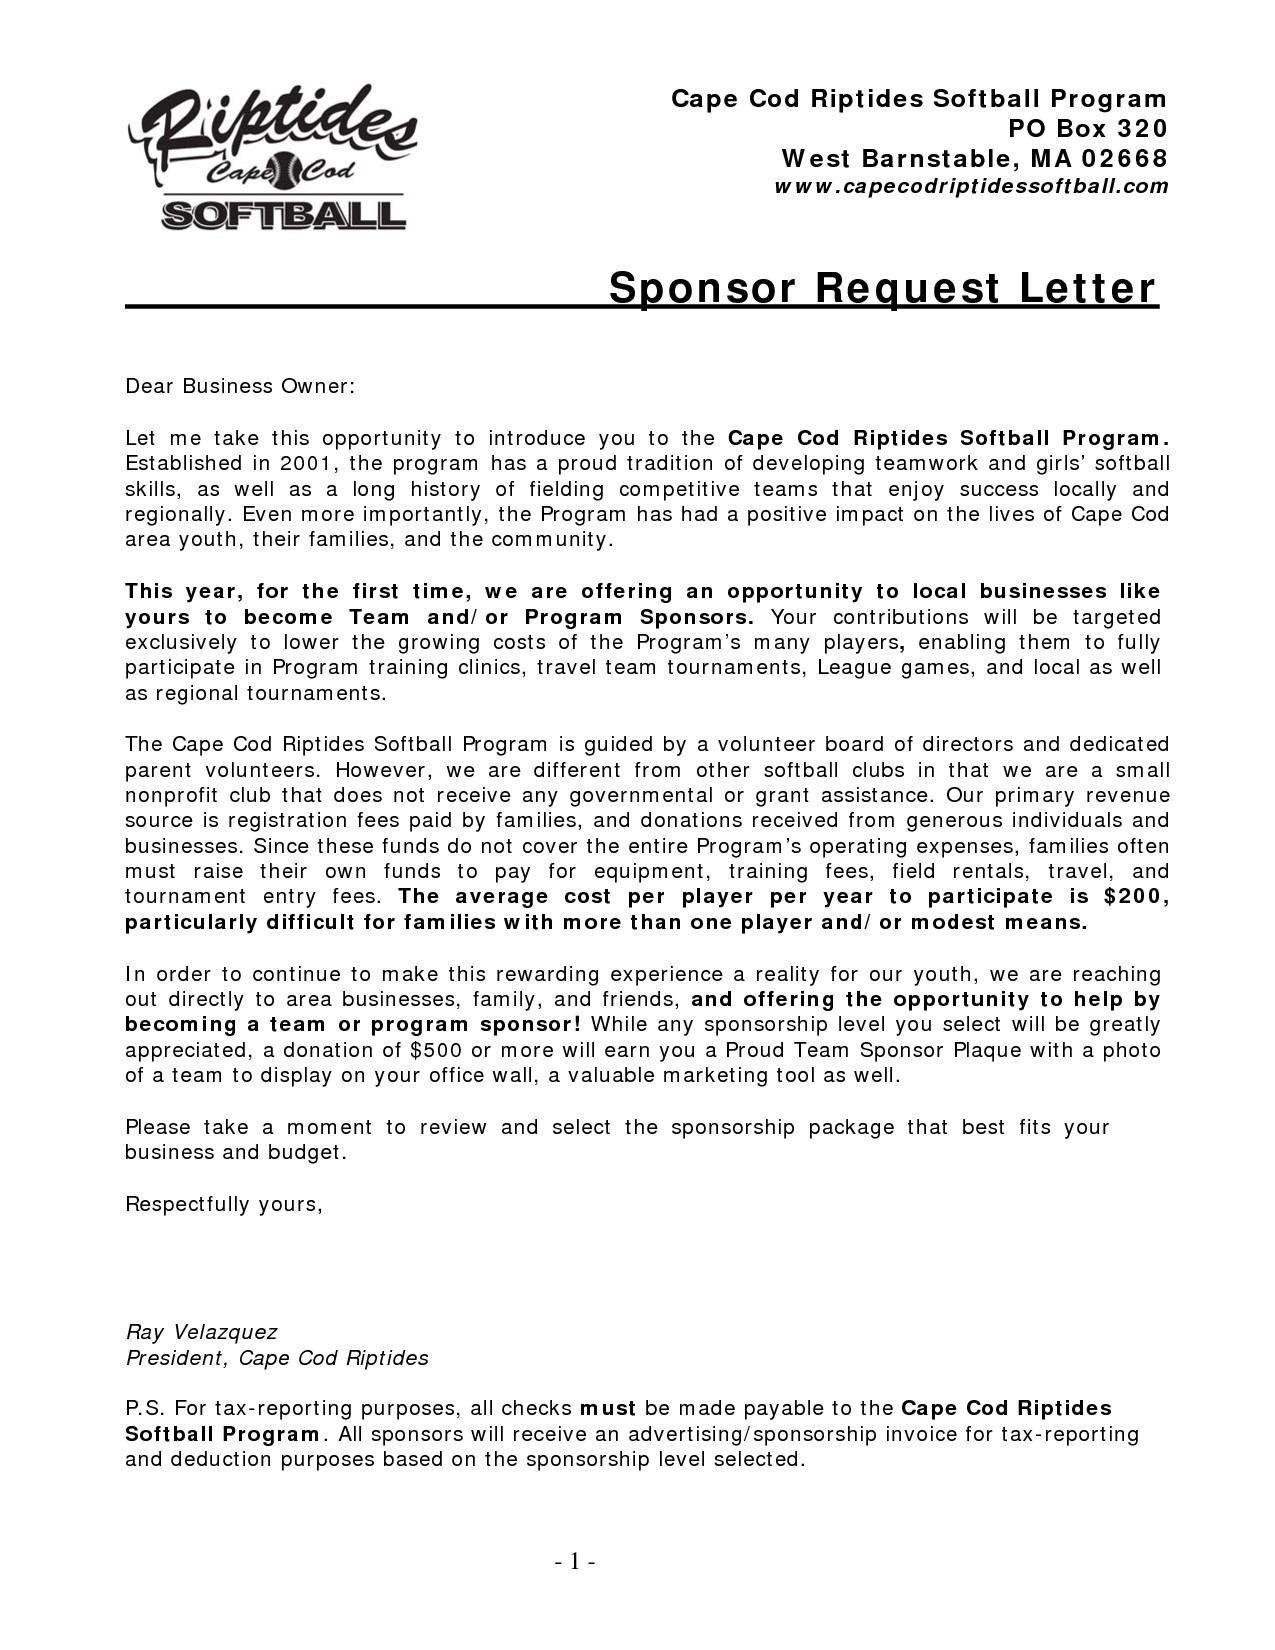 How to Write A Donation Request Letter Template - Sponsorship Request Letter Pdf Save Sample Registration Letter